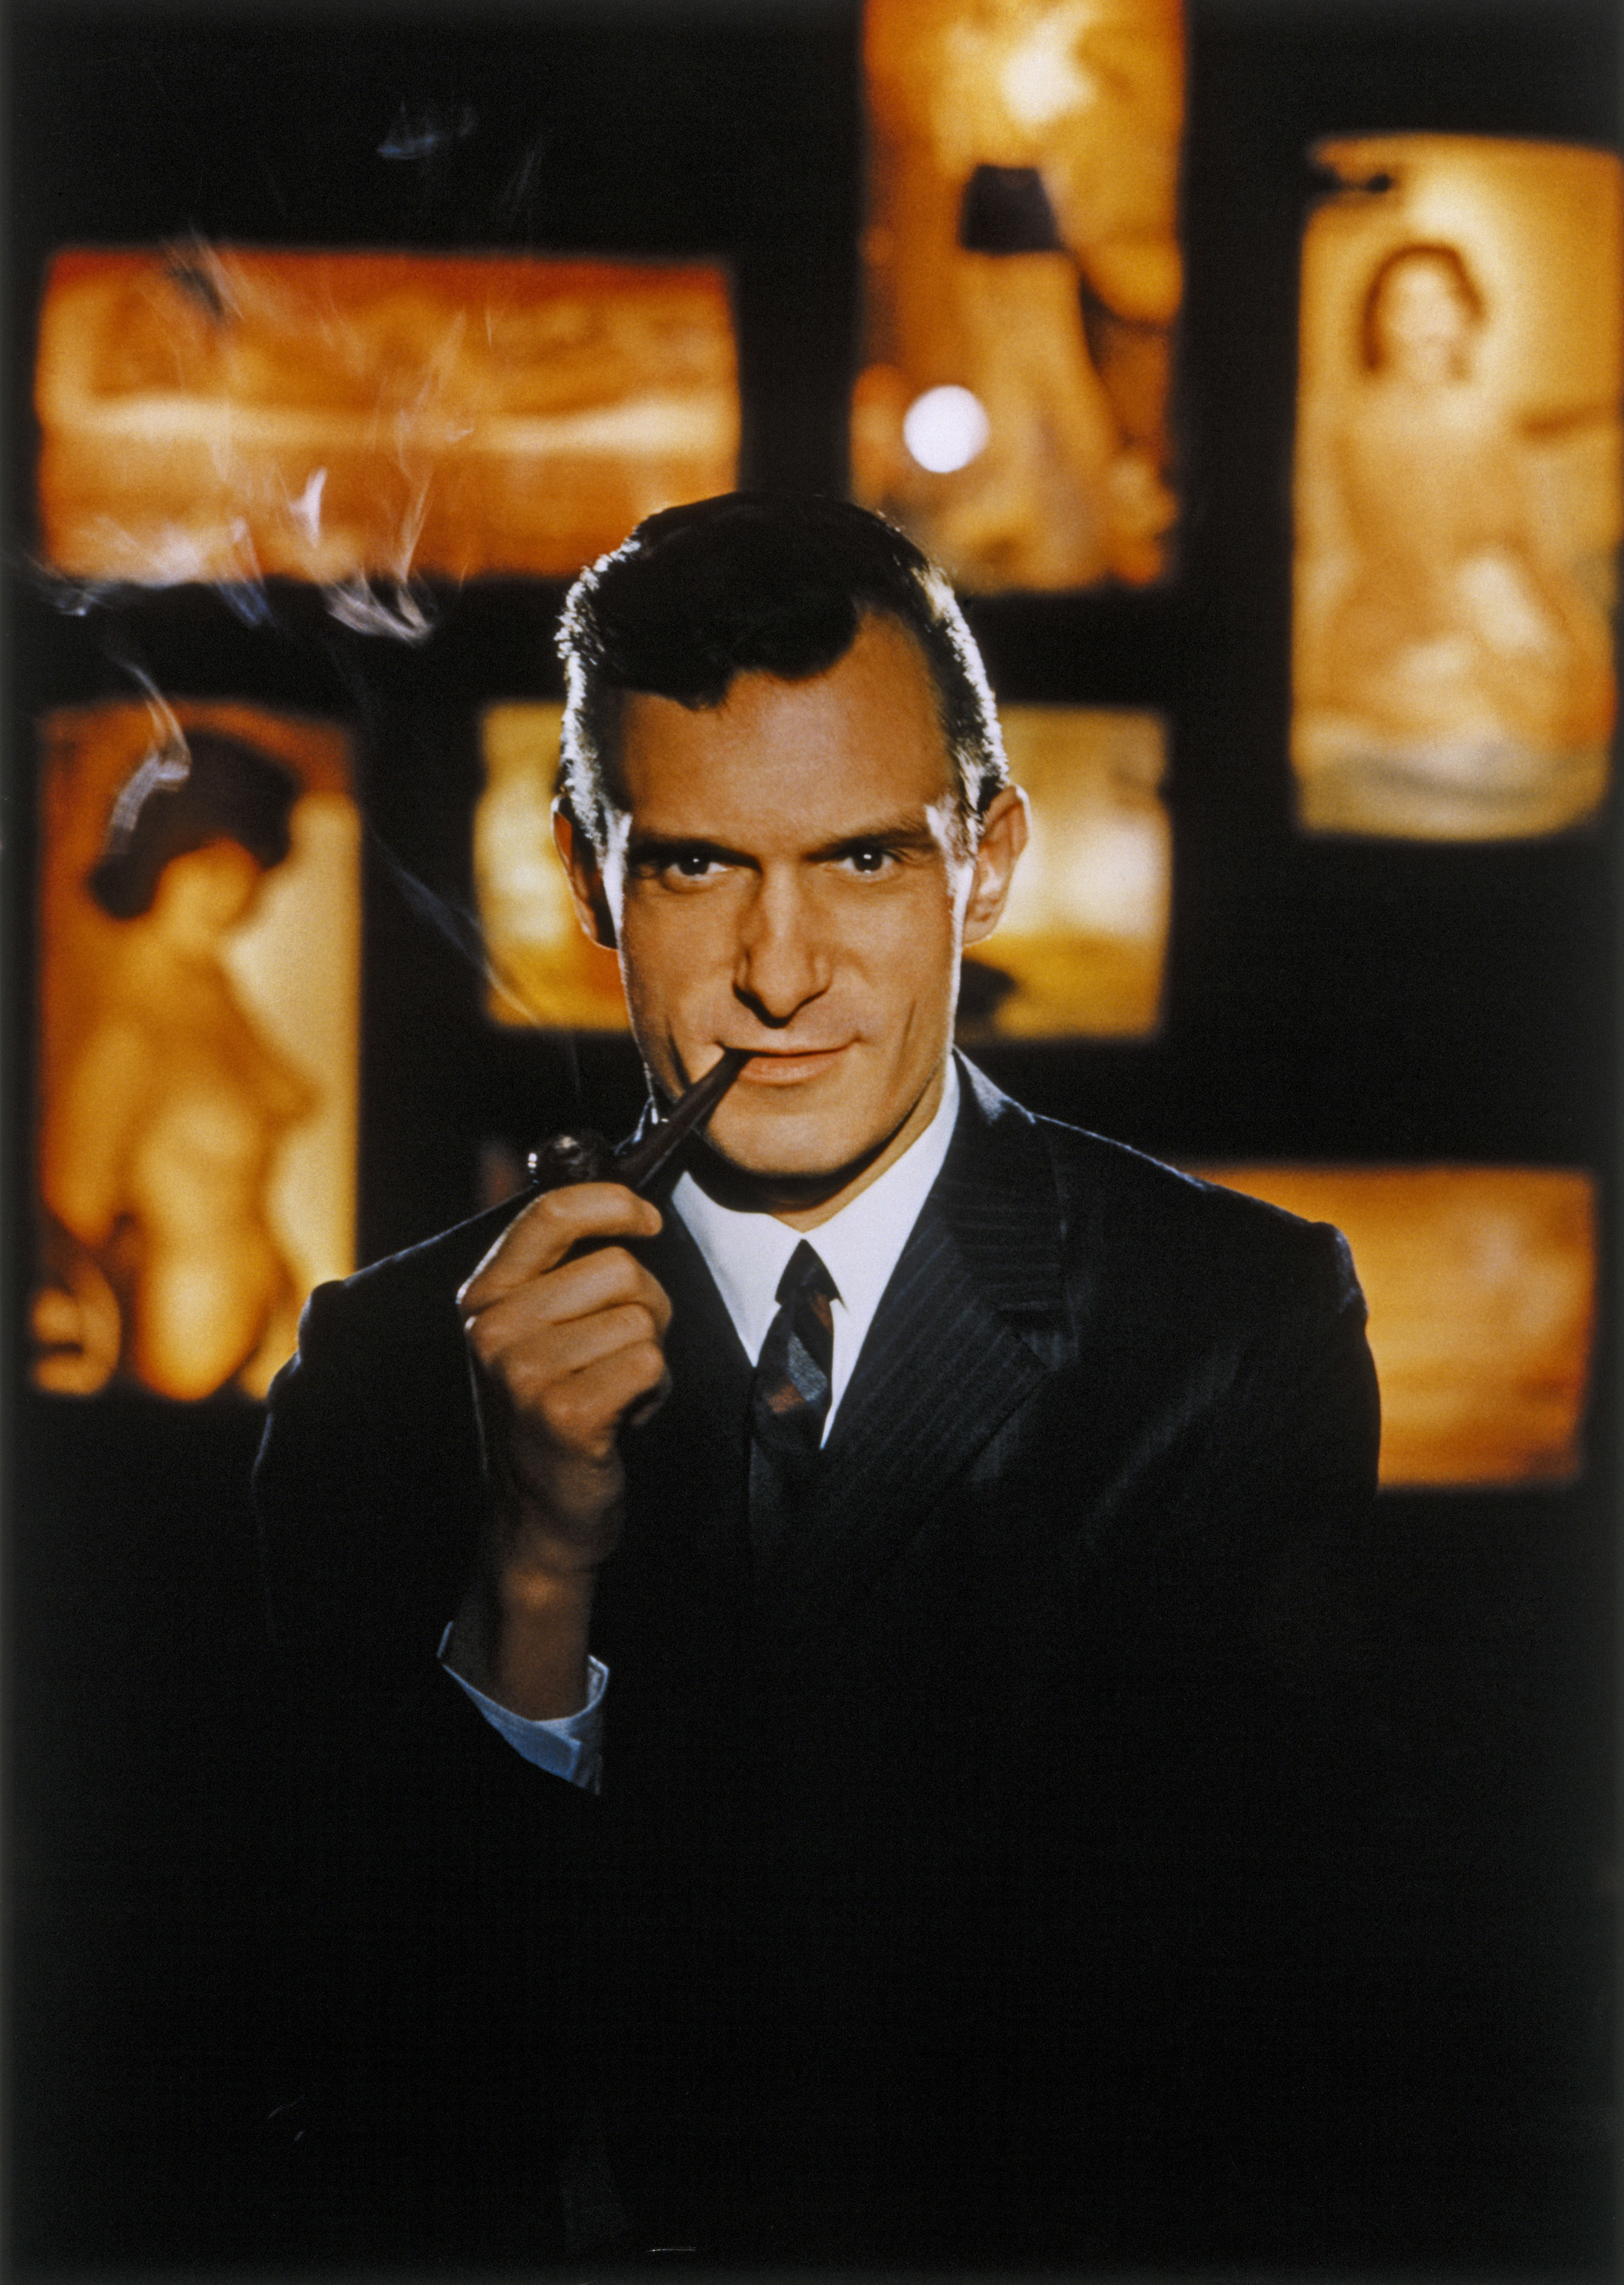 Stephen David Entertainment and Alta Loma Entertainment Pact to Produce AMERICAN PLAYBOY: The Hugh Hefner Story, Mini-Series Based on the Life of Playboy's Founder